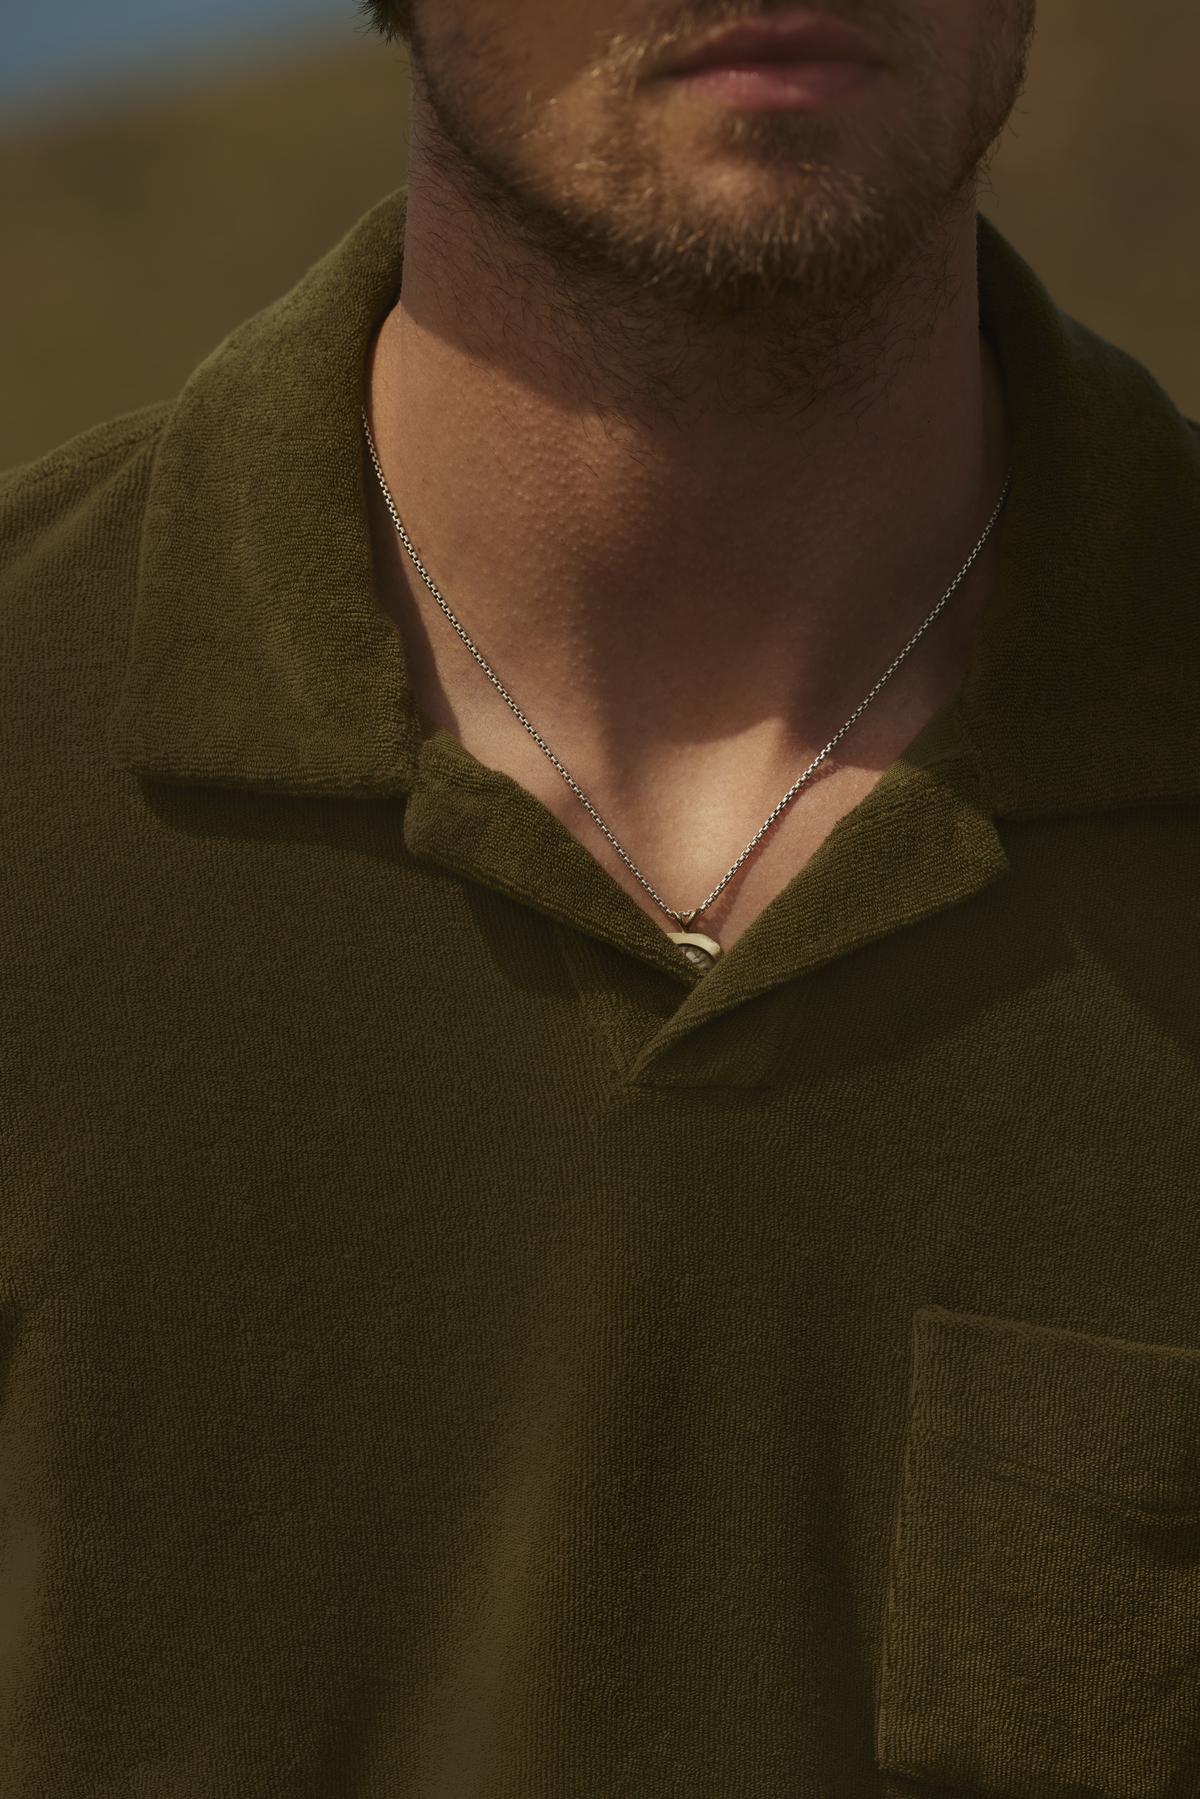 Close-up of a man in a green shirt, focusing on his neck and lower face, with a SERGEY POLO chain visible around his neck. The background is softly blurred.-36753587896513